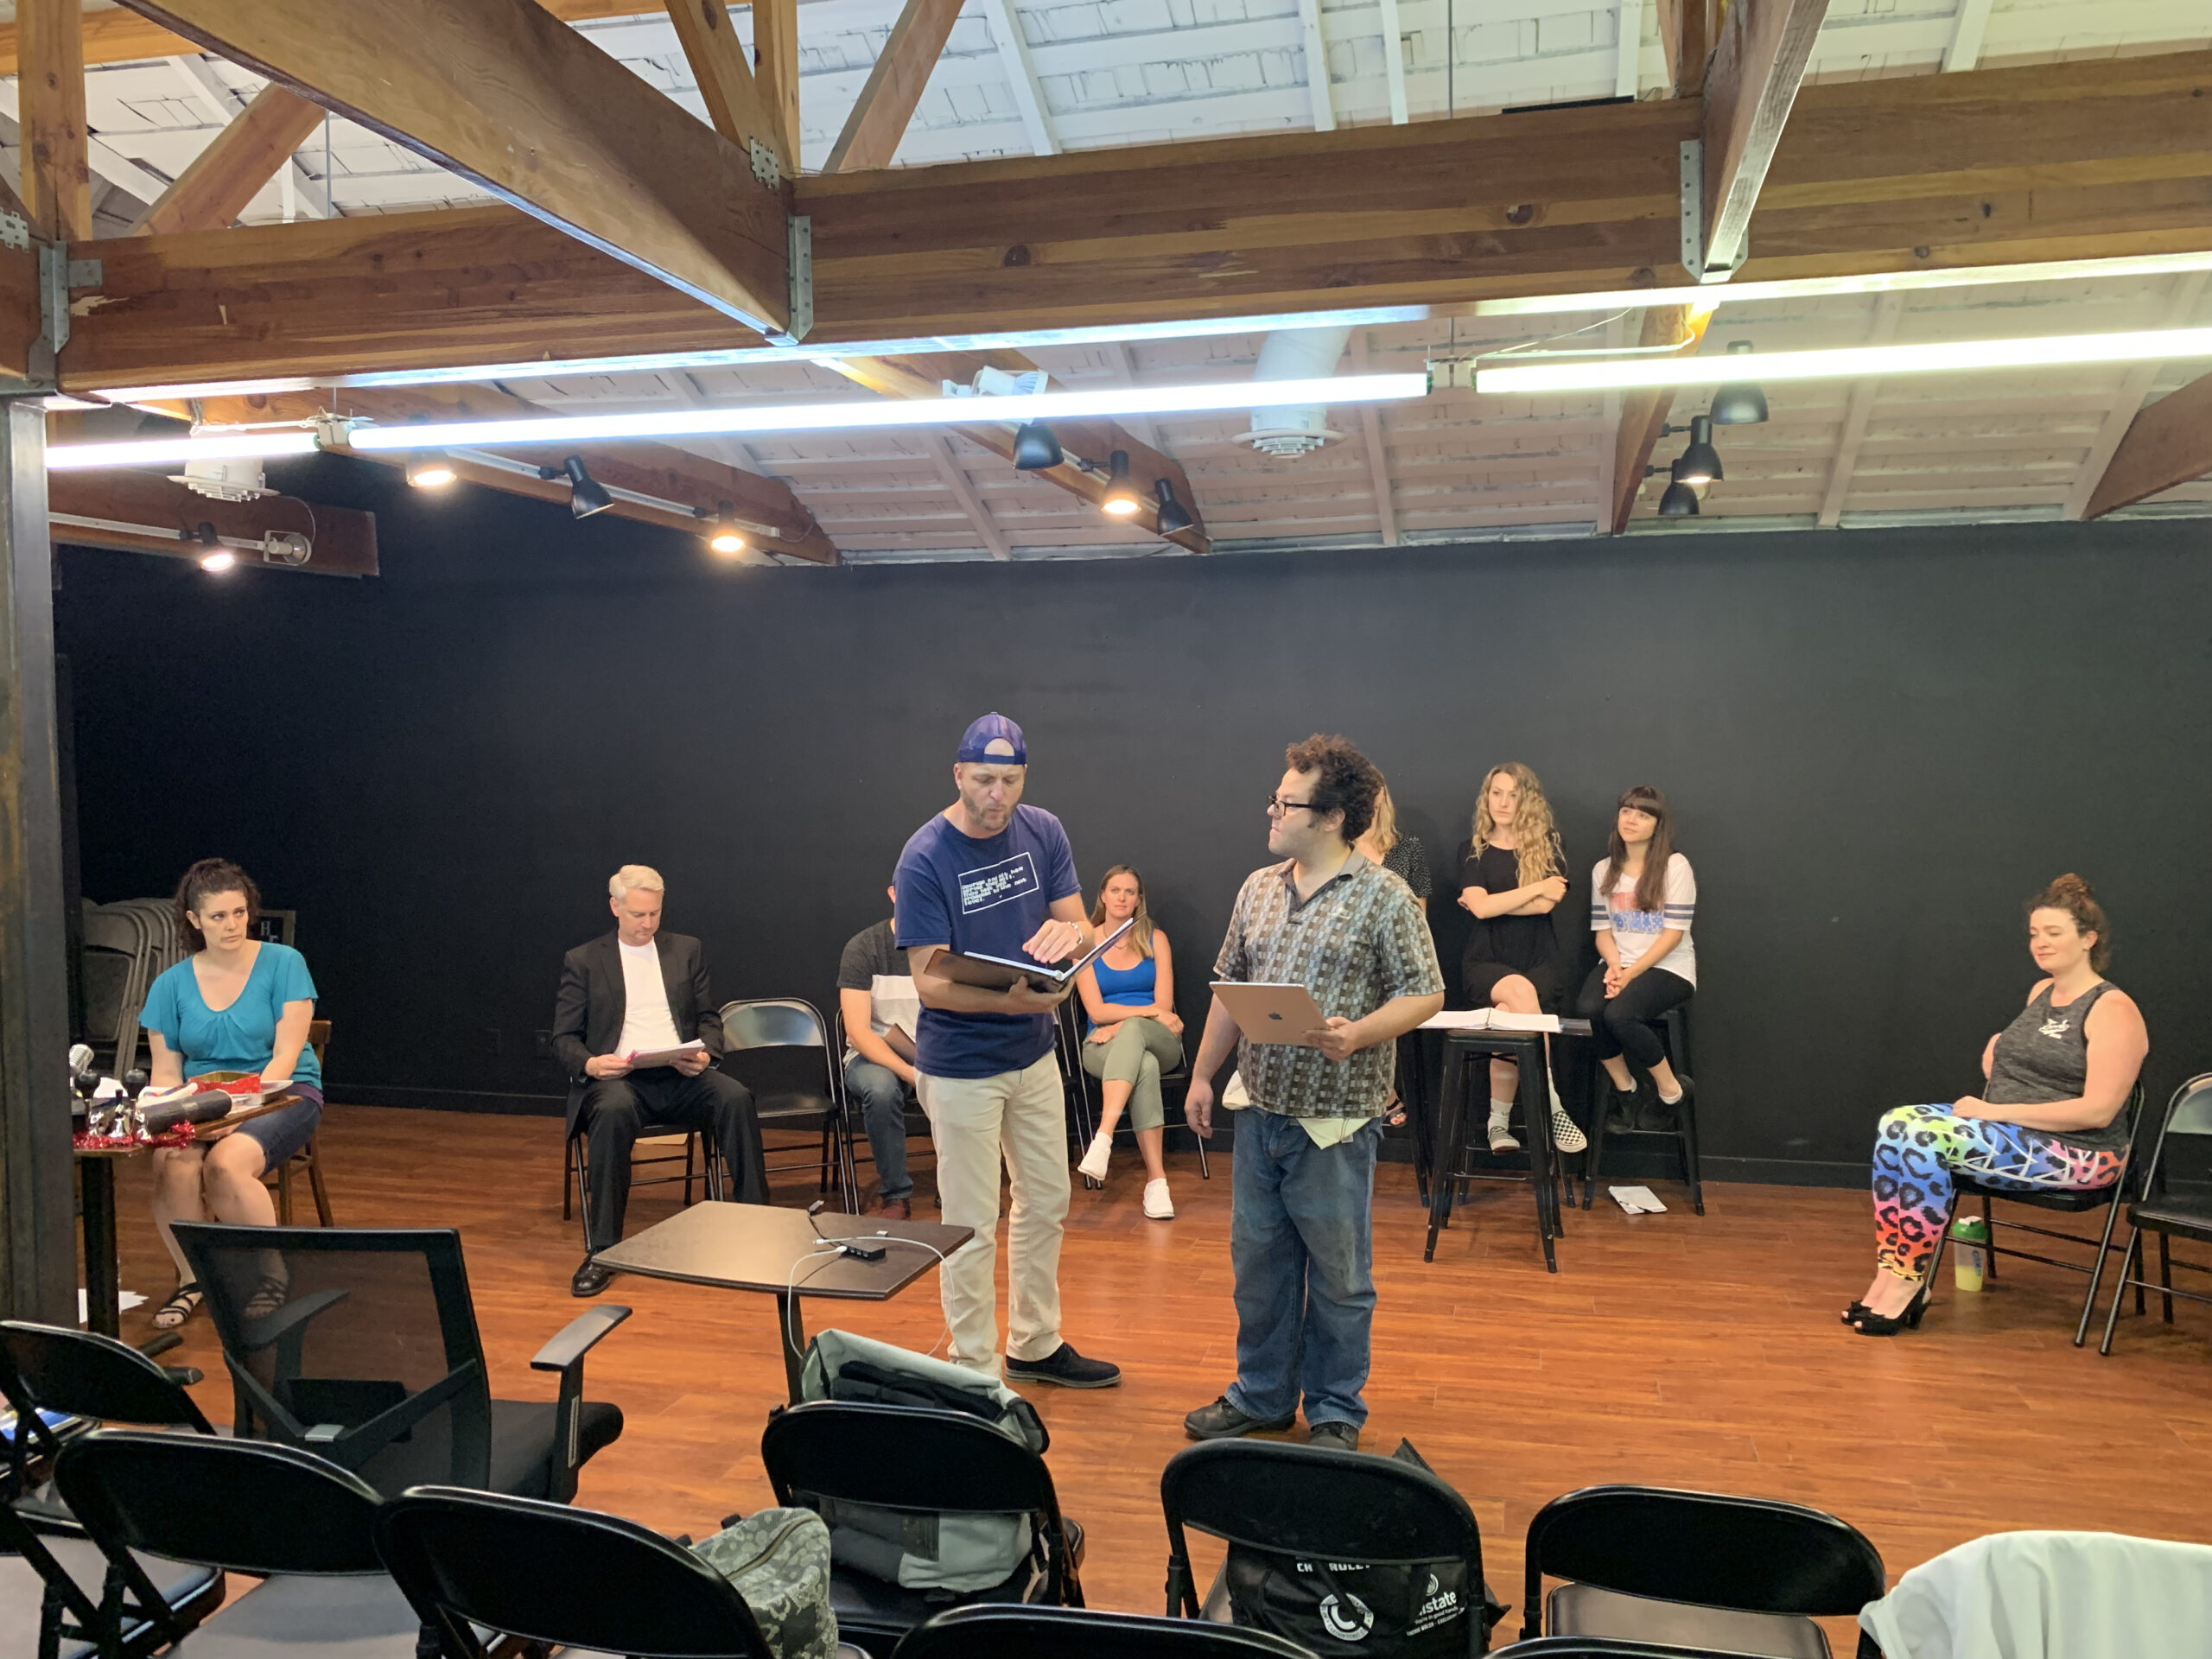 Theatre Unleashed rehearses KAWL presents "It's a Wonderful Life" at Howard Fine Acting Studio in July 2019 for a special "Christmas in July" performance at The Muckenthaler Cultural Center